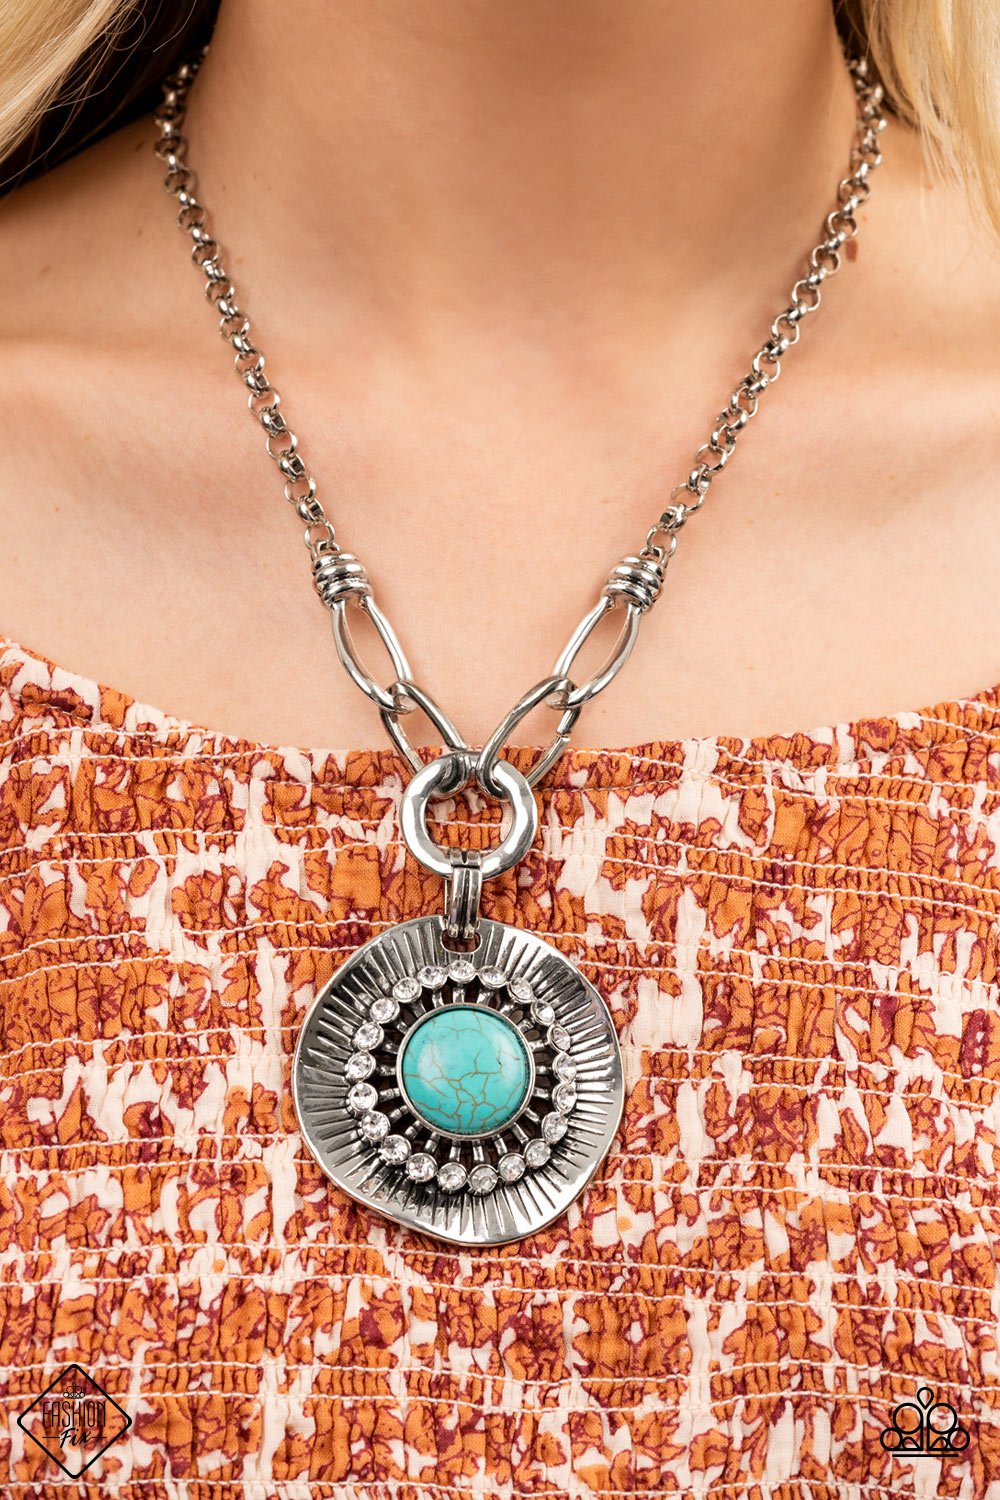 Badlands Treasure Hunt - Blue Turquoise - Silver Necklace  - Paparazzi Accessories - A circle of glassy white rhinestones fans out around an oversized turquoise stone, centered atop a warped silver disc. Etched with linear details, the earthy pendant attaches to oversized silver links, creating an artisan inspired statement piece. Features an adjustable clasp closure.